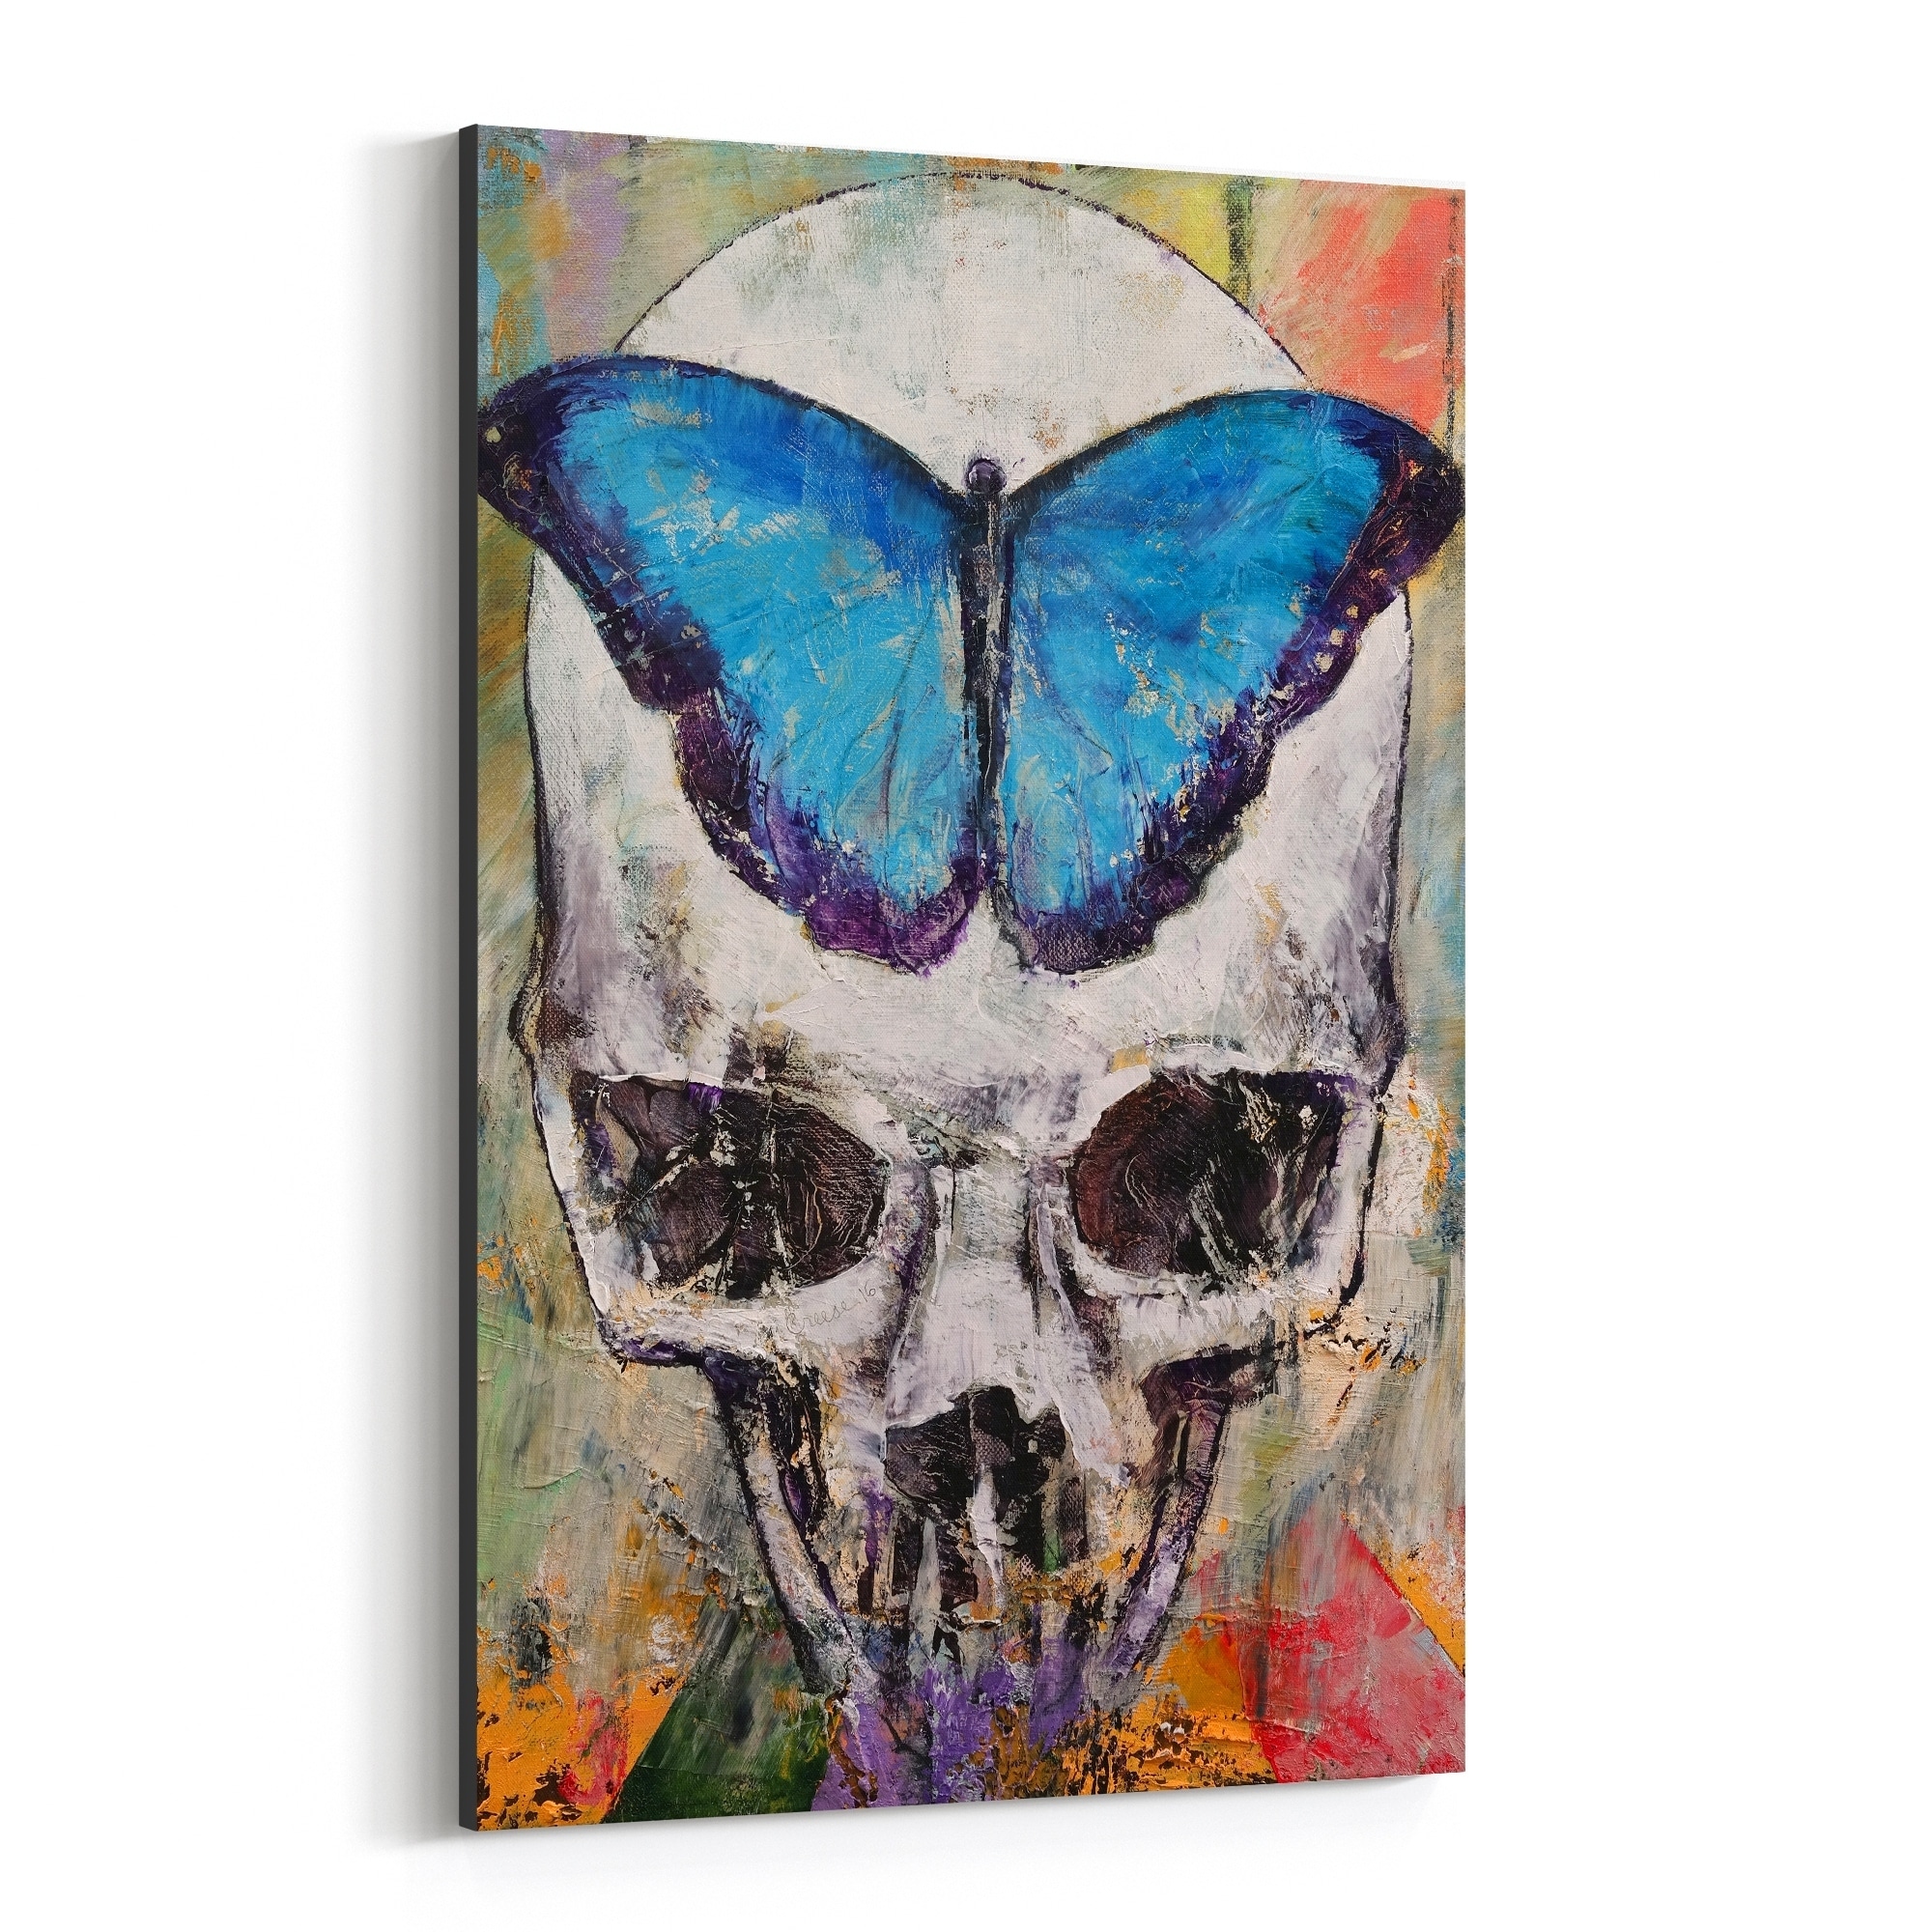 Shop Noir Gallery Butterfly Skull Gothic Painting Canvas Wall Art Print Overstock 28721591